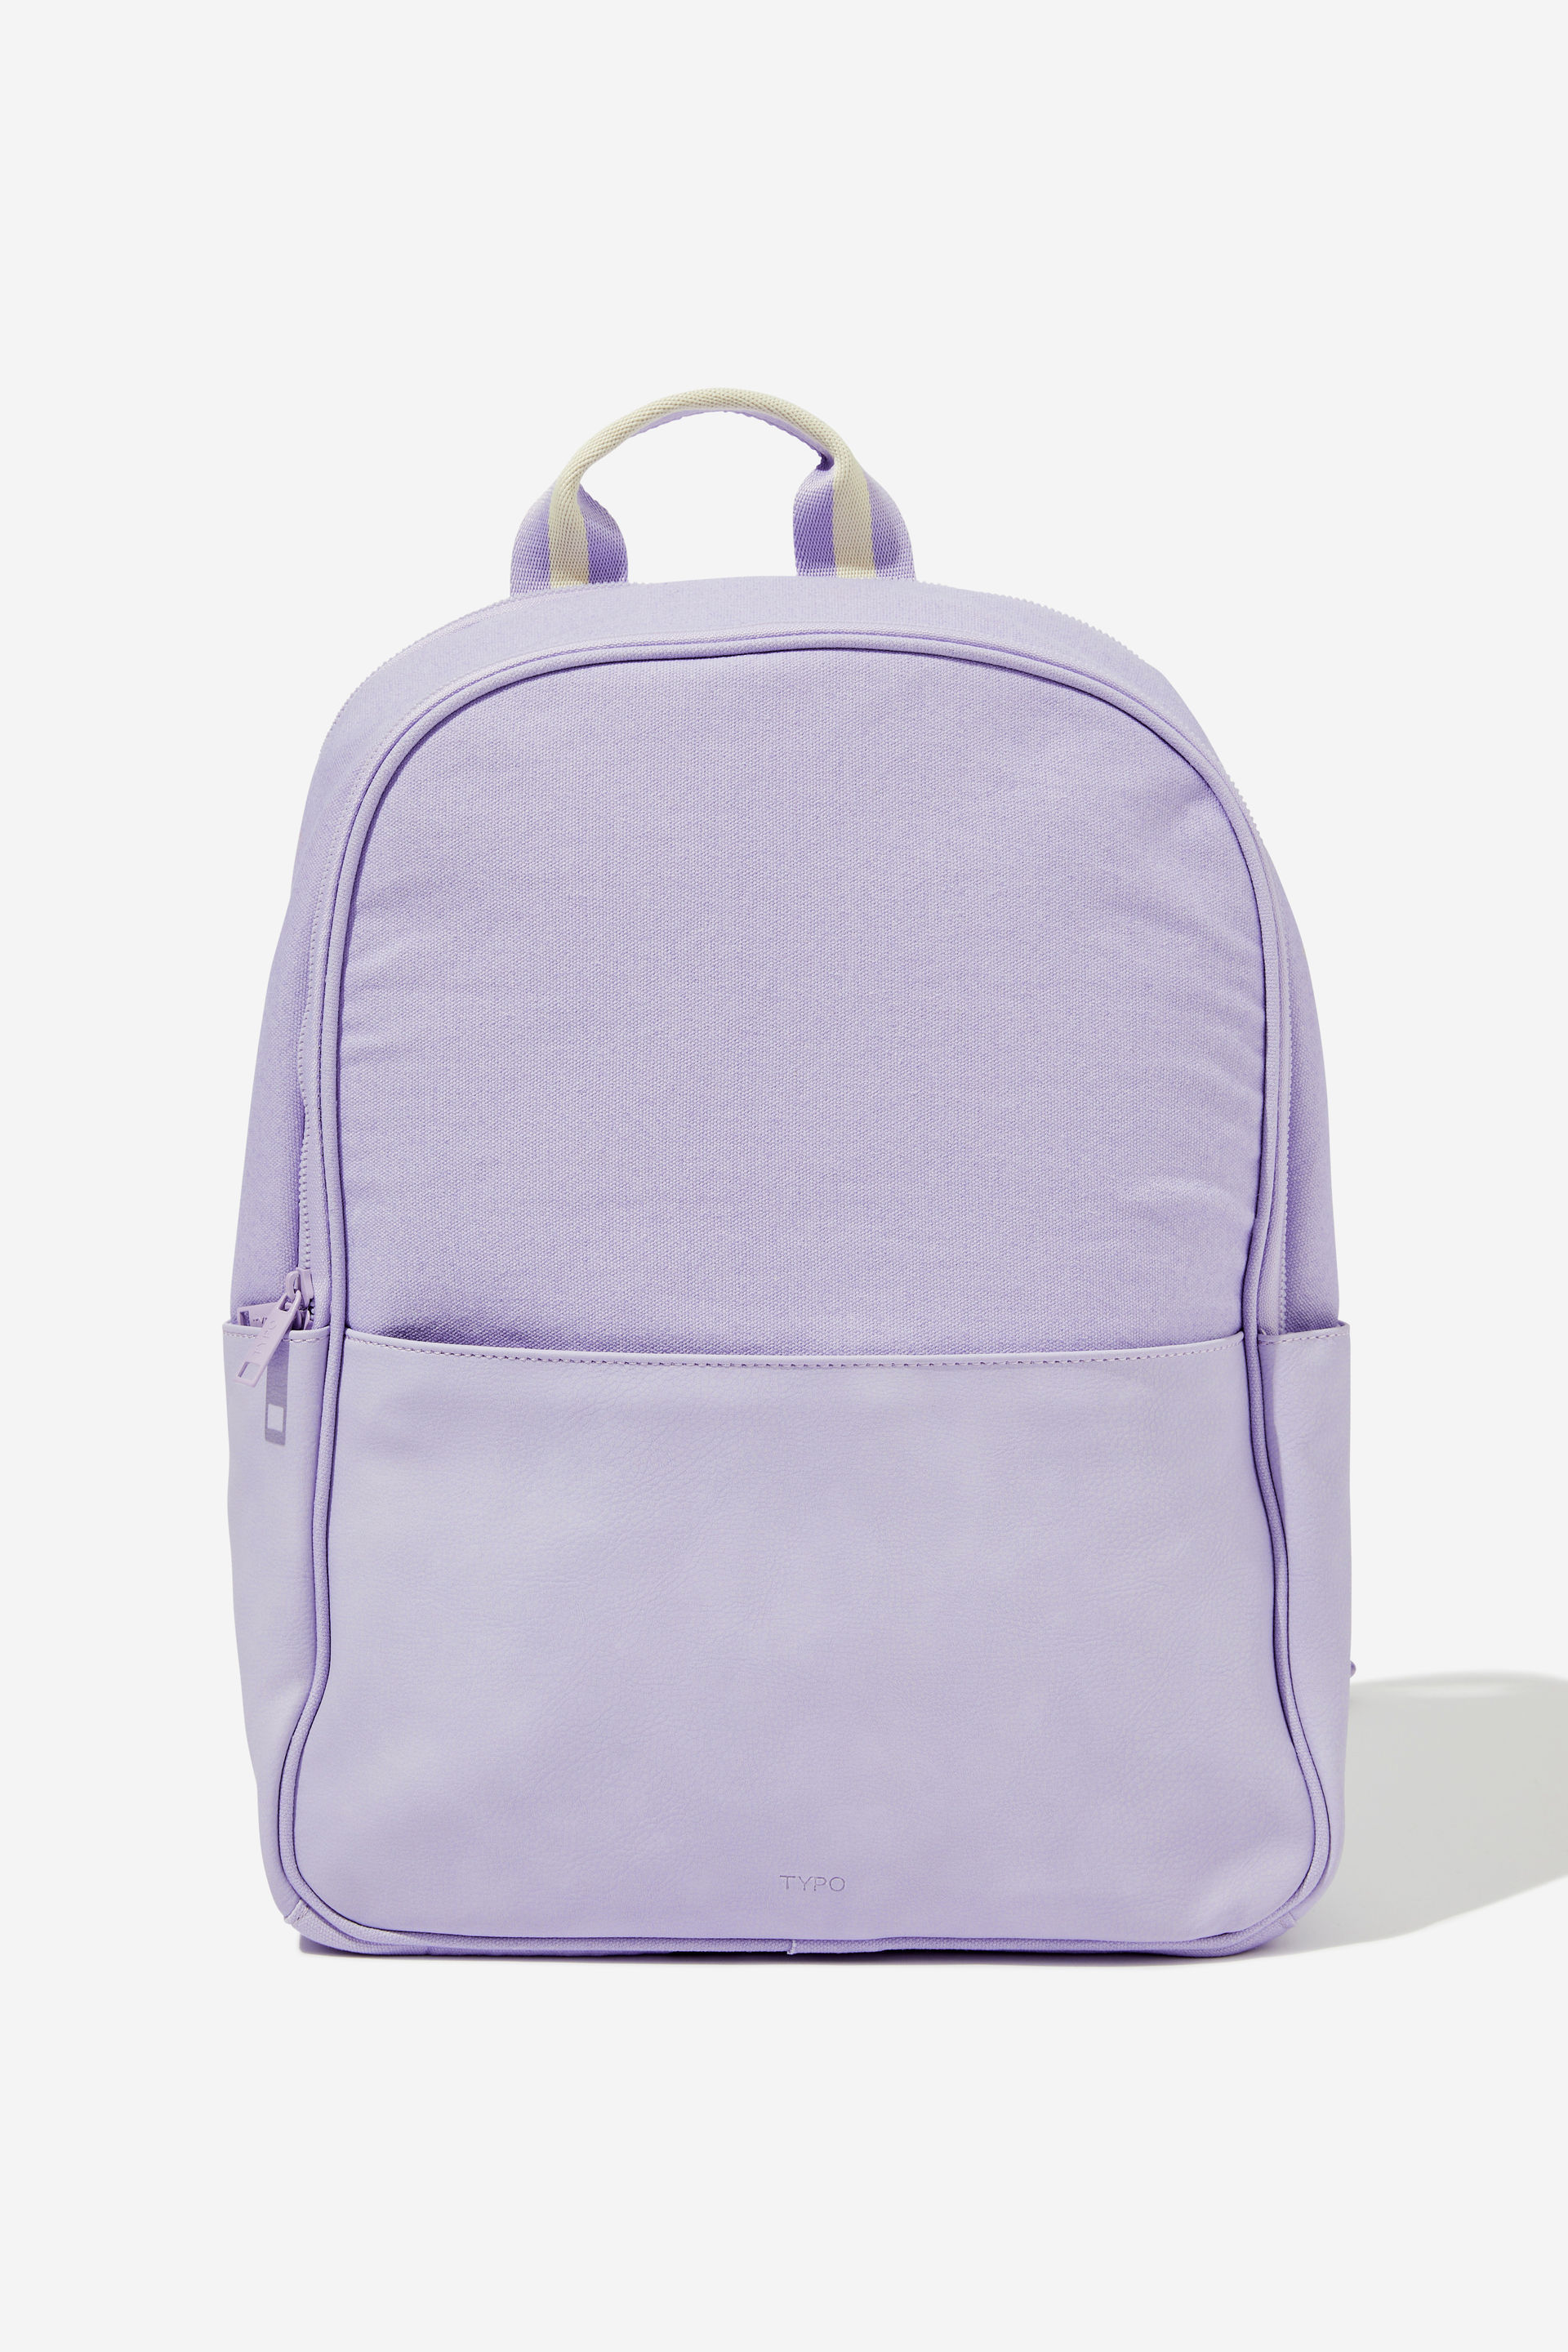 Typo - Essential Commuter Backpack - Soft lilac